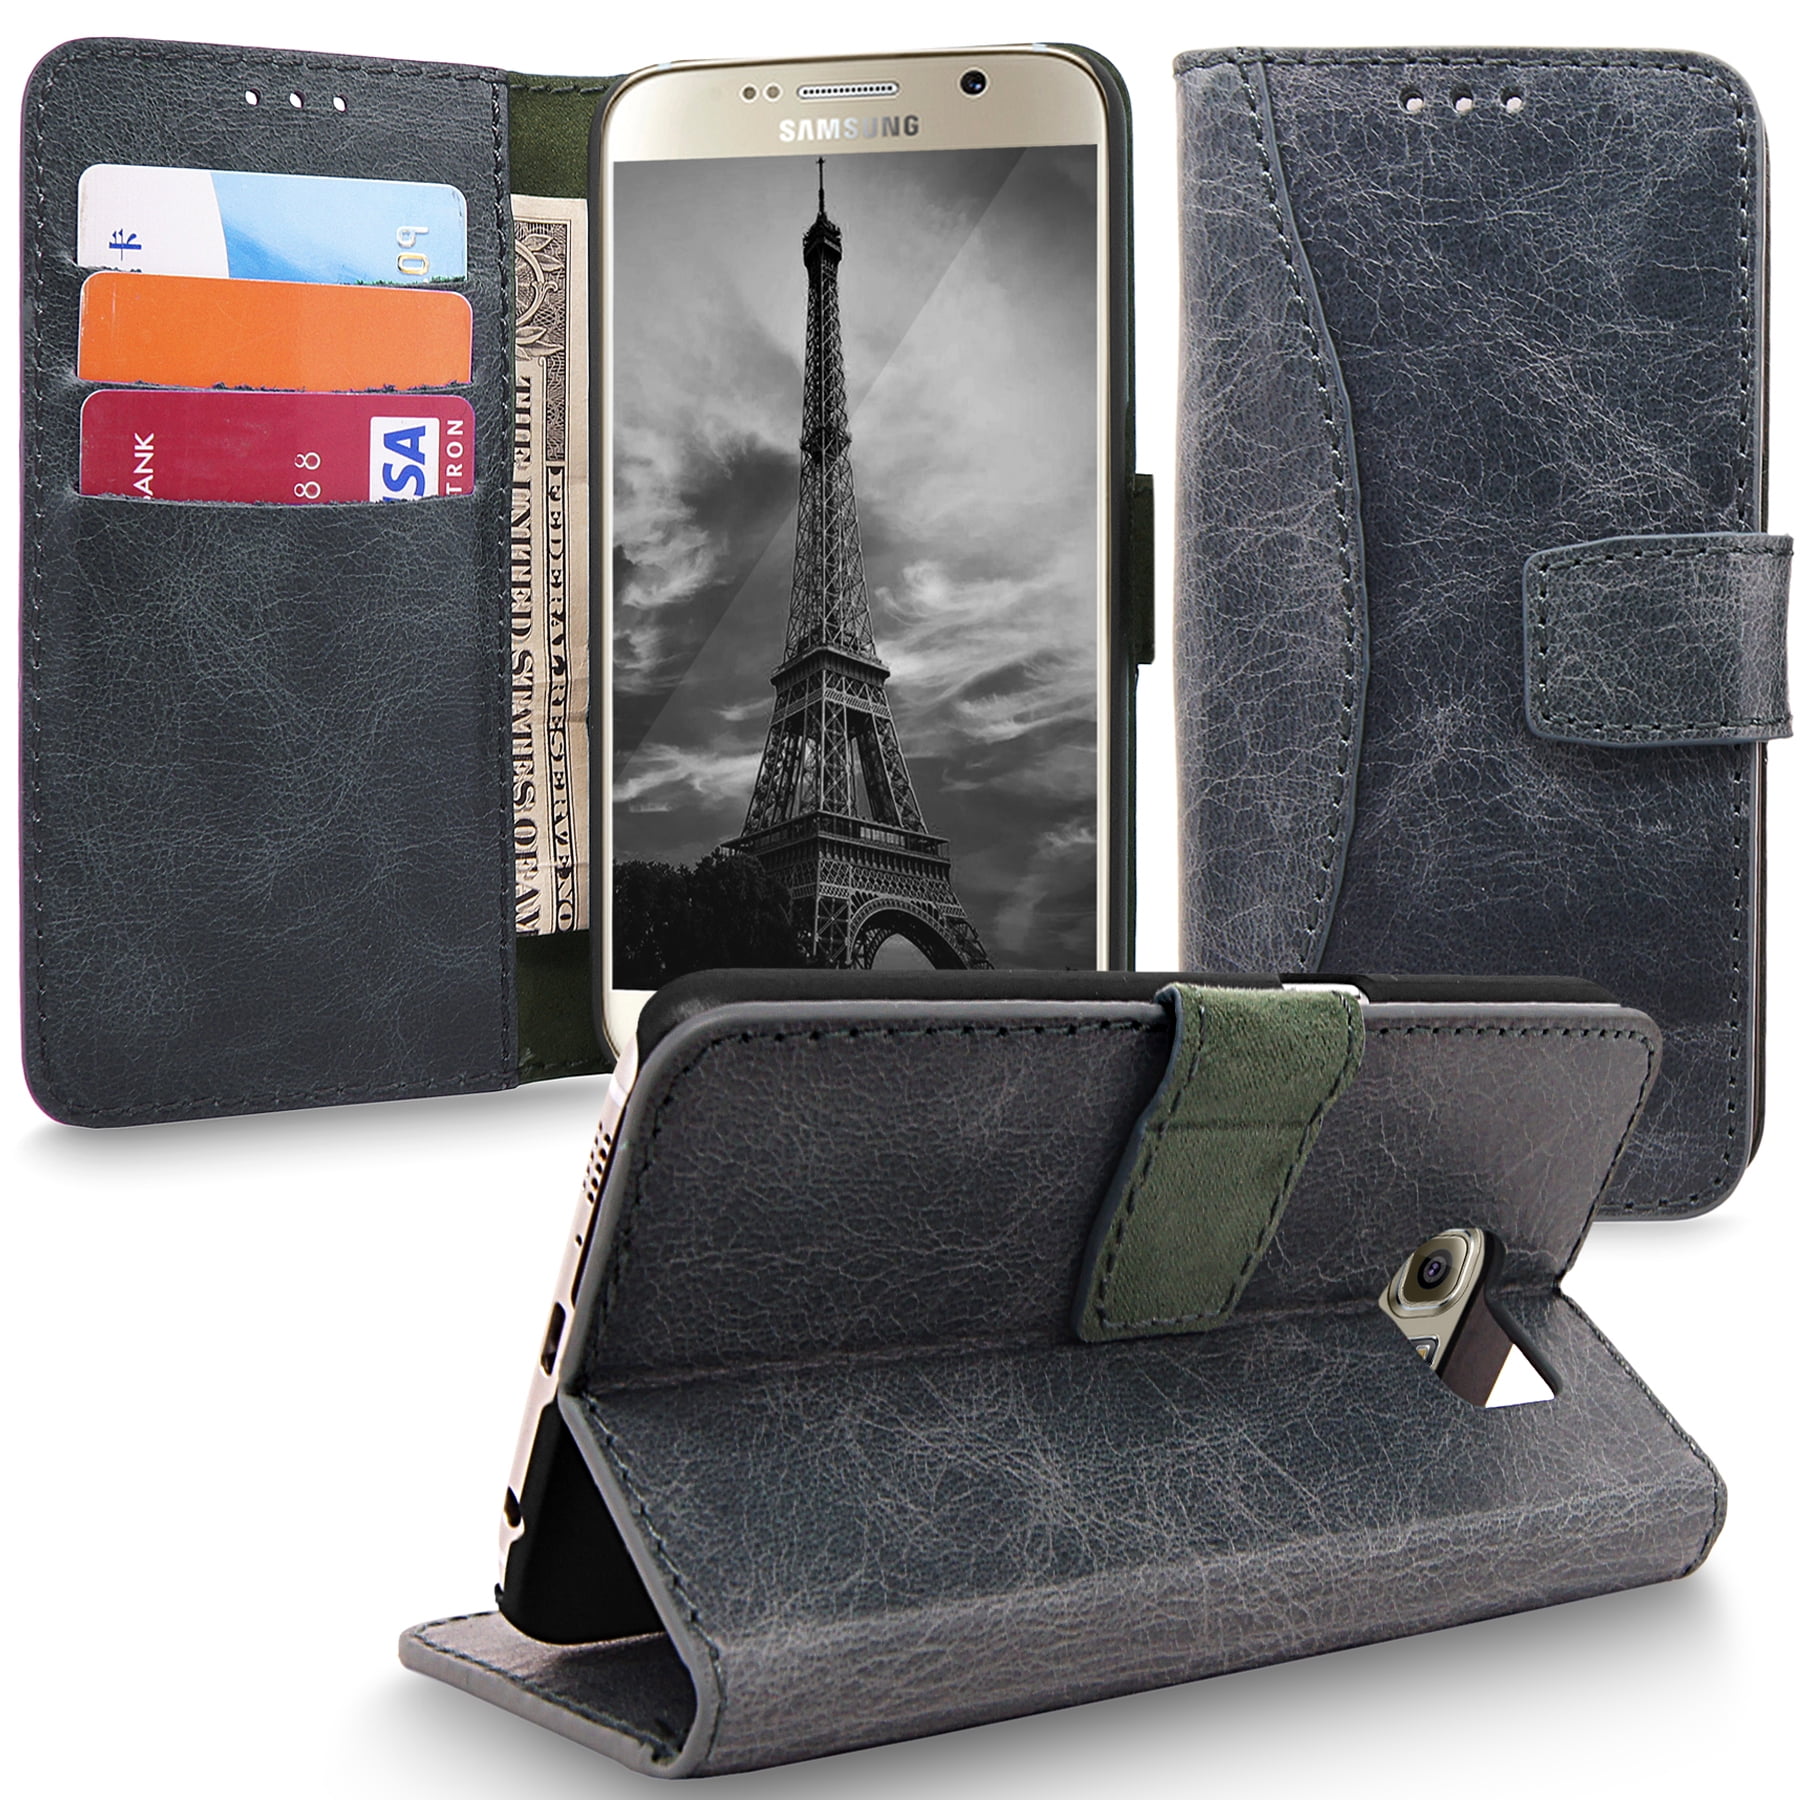 Samsung Galaxy S6 Case Premium Leather Phone Case PU Flip Fold Book Wallet Style Card Slots Magnetic Closure Shockproof Case Butterfly love